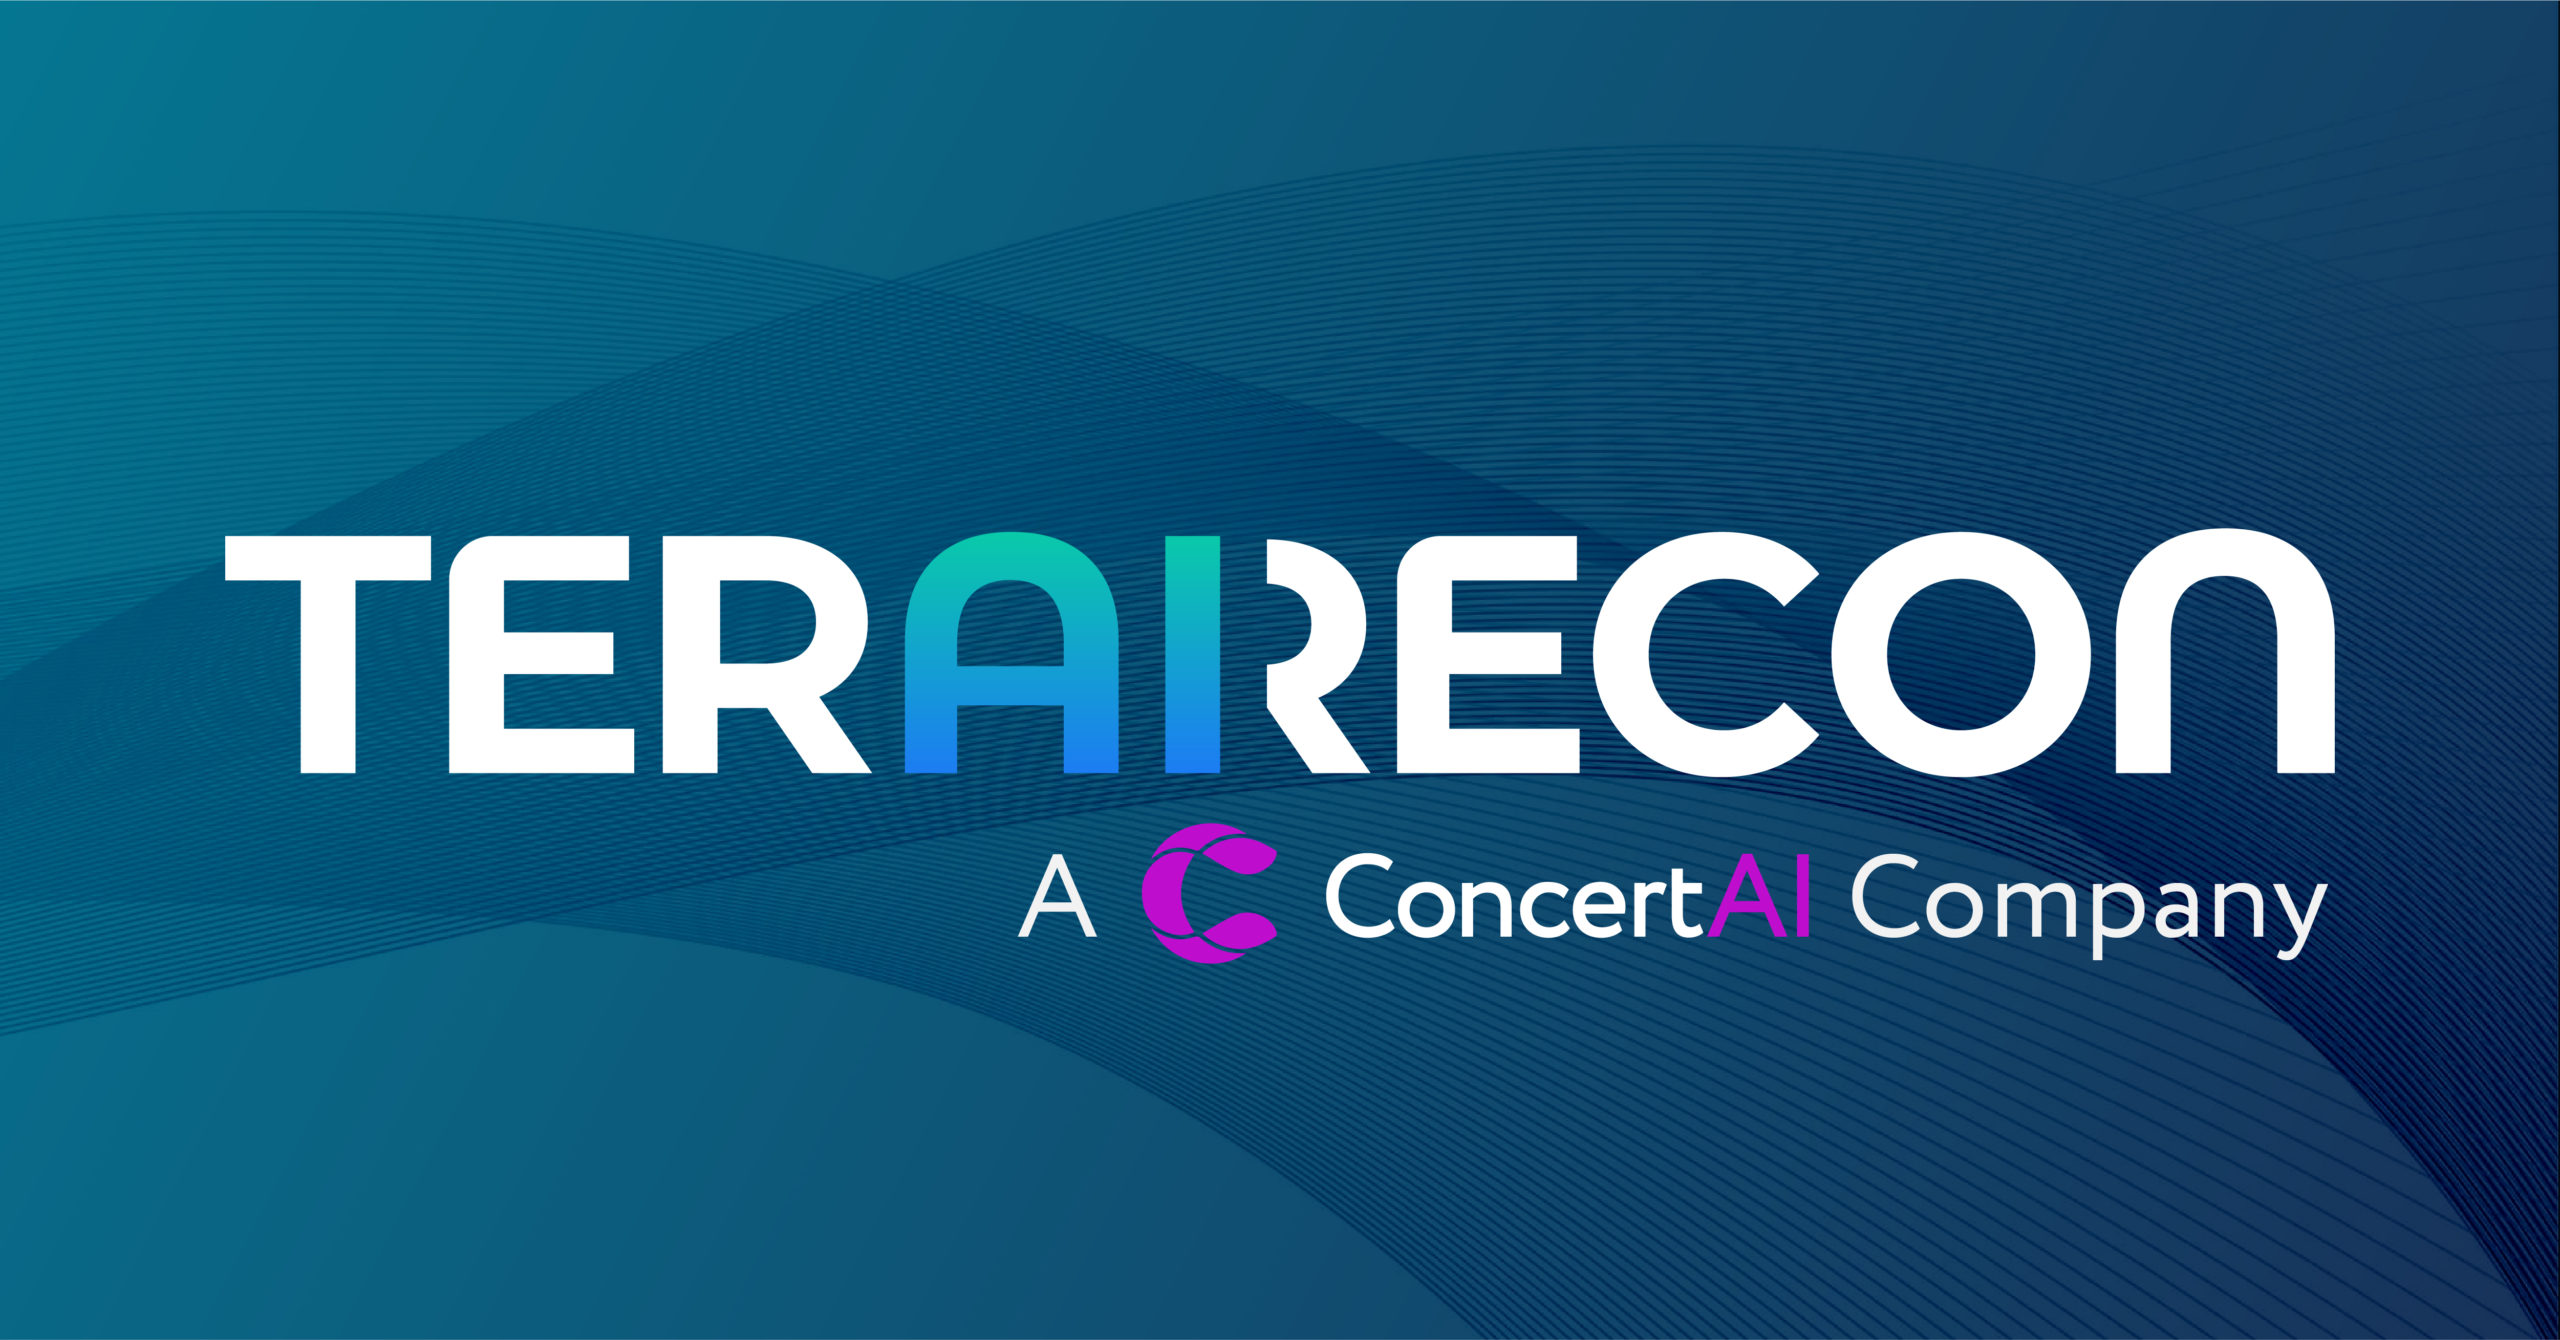 ConcertAI's TeraRecon Accelerates Multi-Specialty Advanced Visualization Capabilities with the Launch of Intuition 4.6